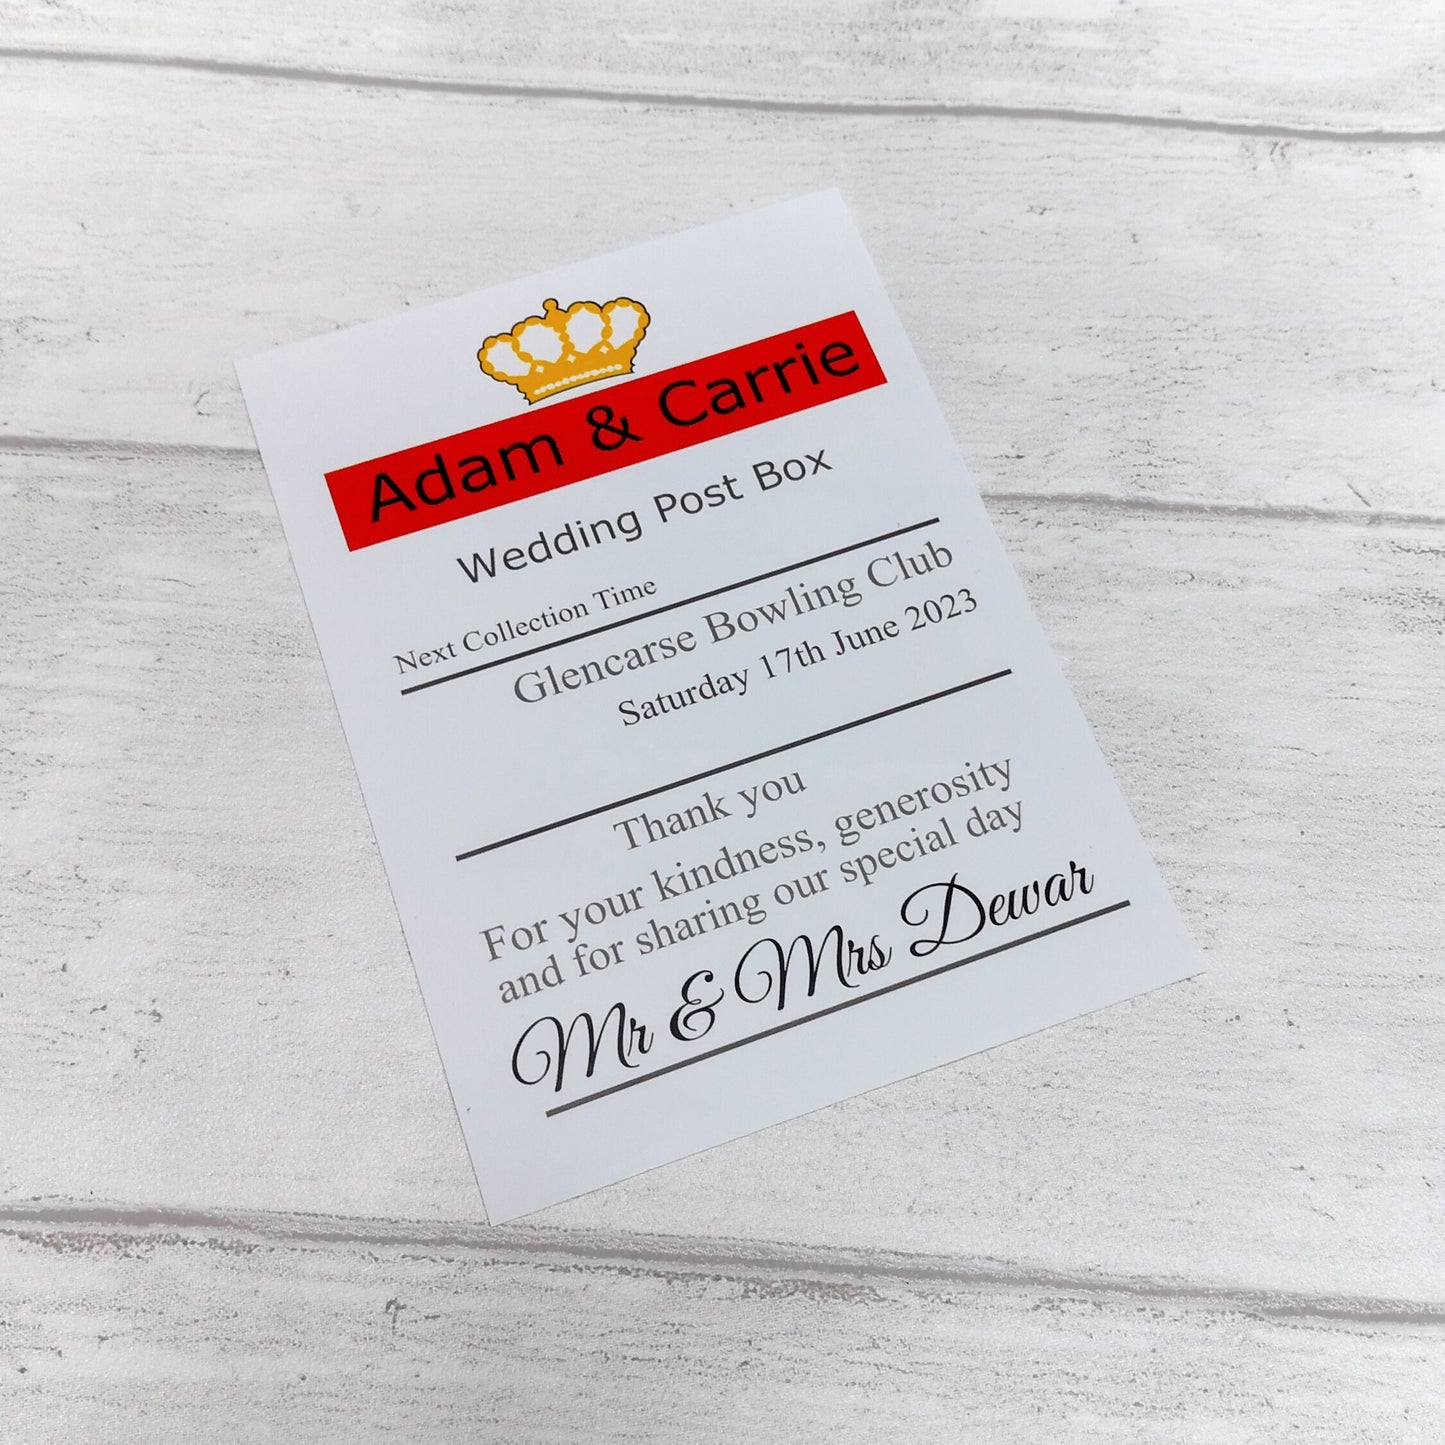 Royal Mail Event Post Box Sign,  Personalised for any occasion, Wedding Post Box Decal